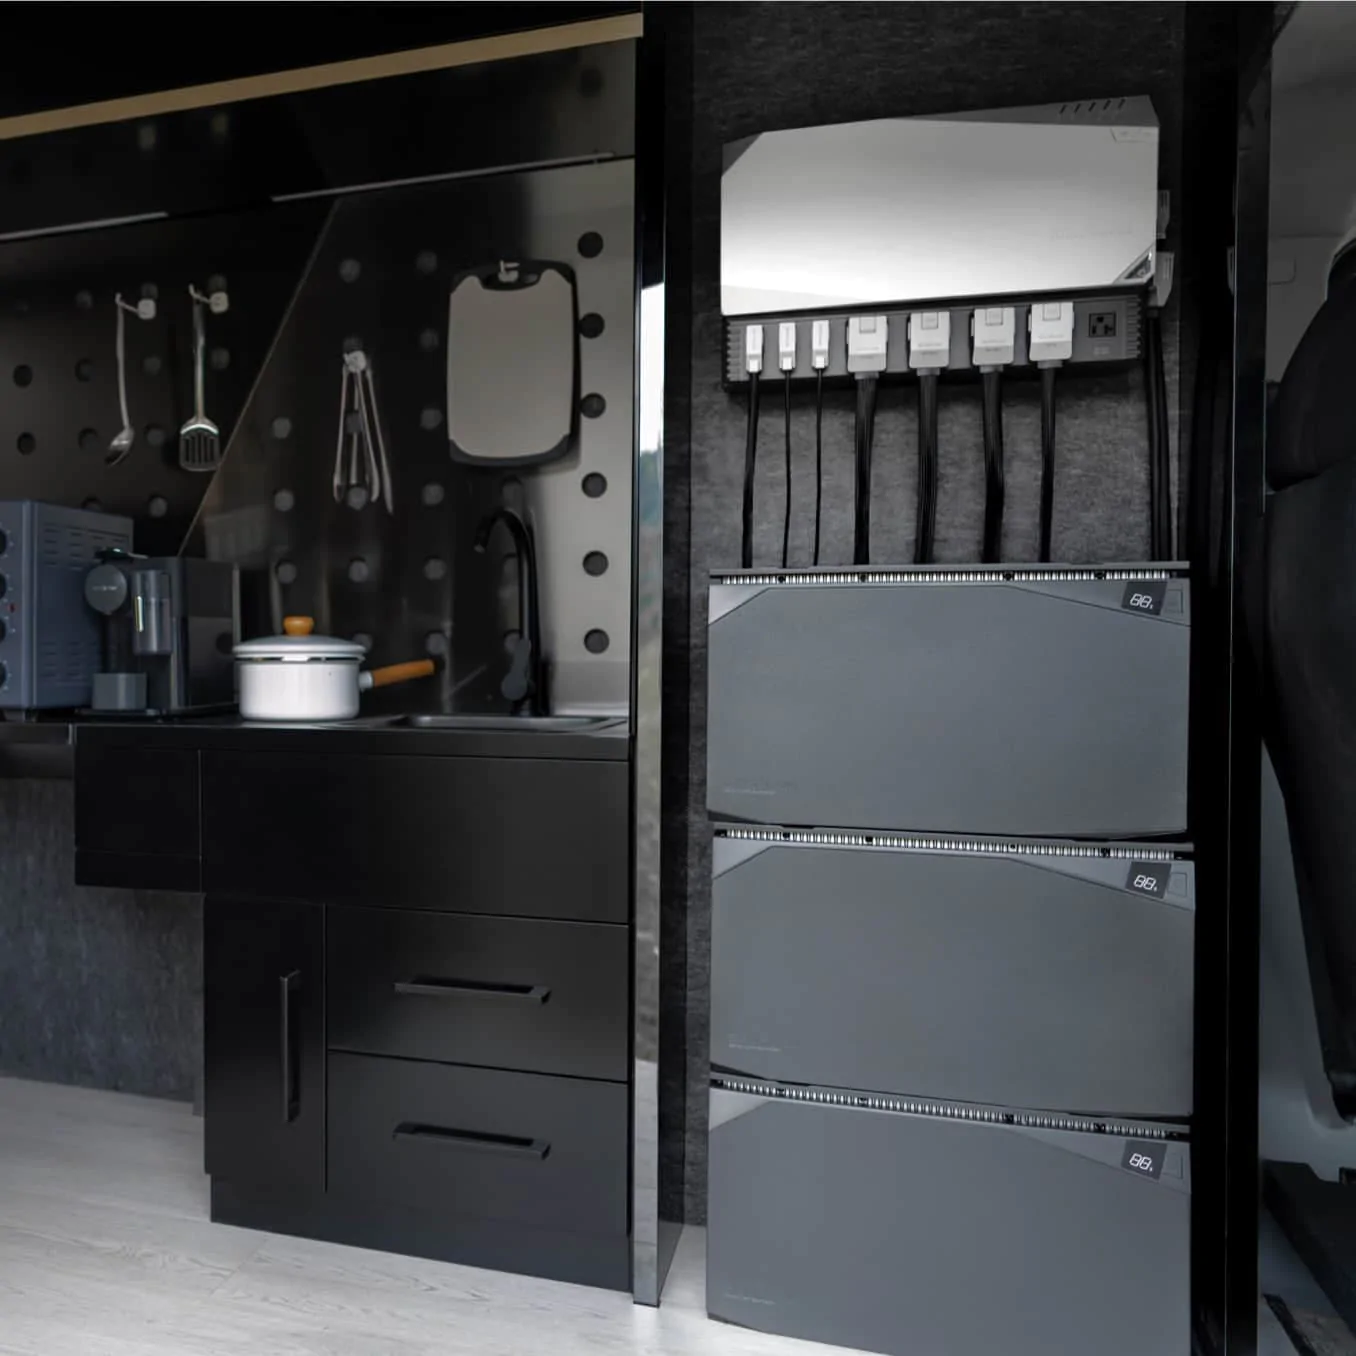 A kitchen in a black and white van equipped with EcoFlow 15kWh Power Kits for ultimate independence and quick shipping.